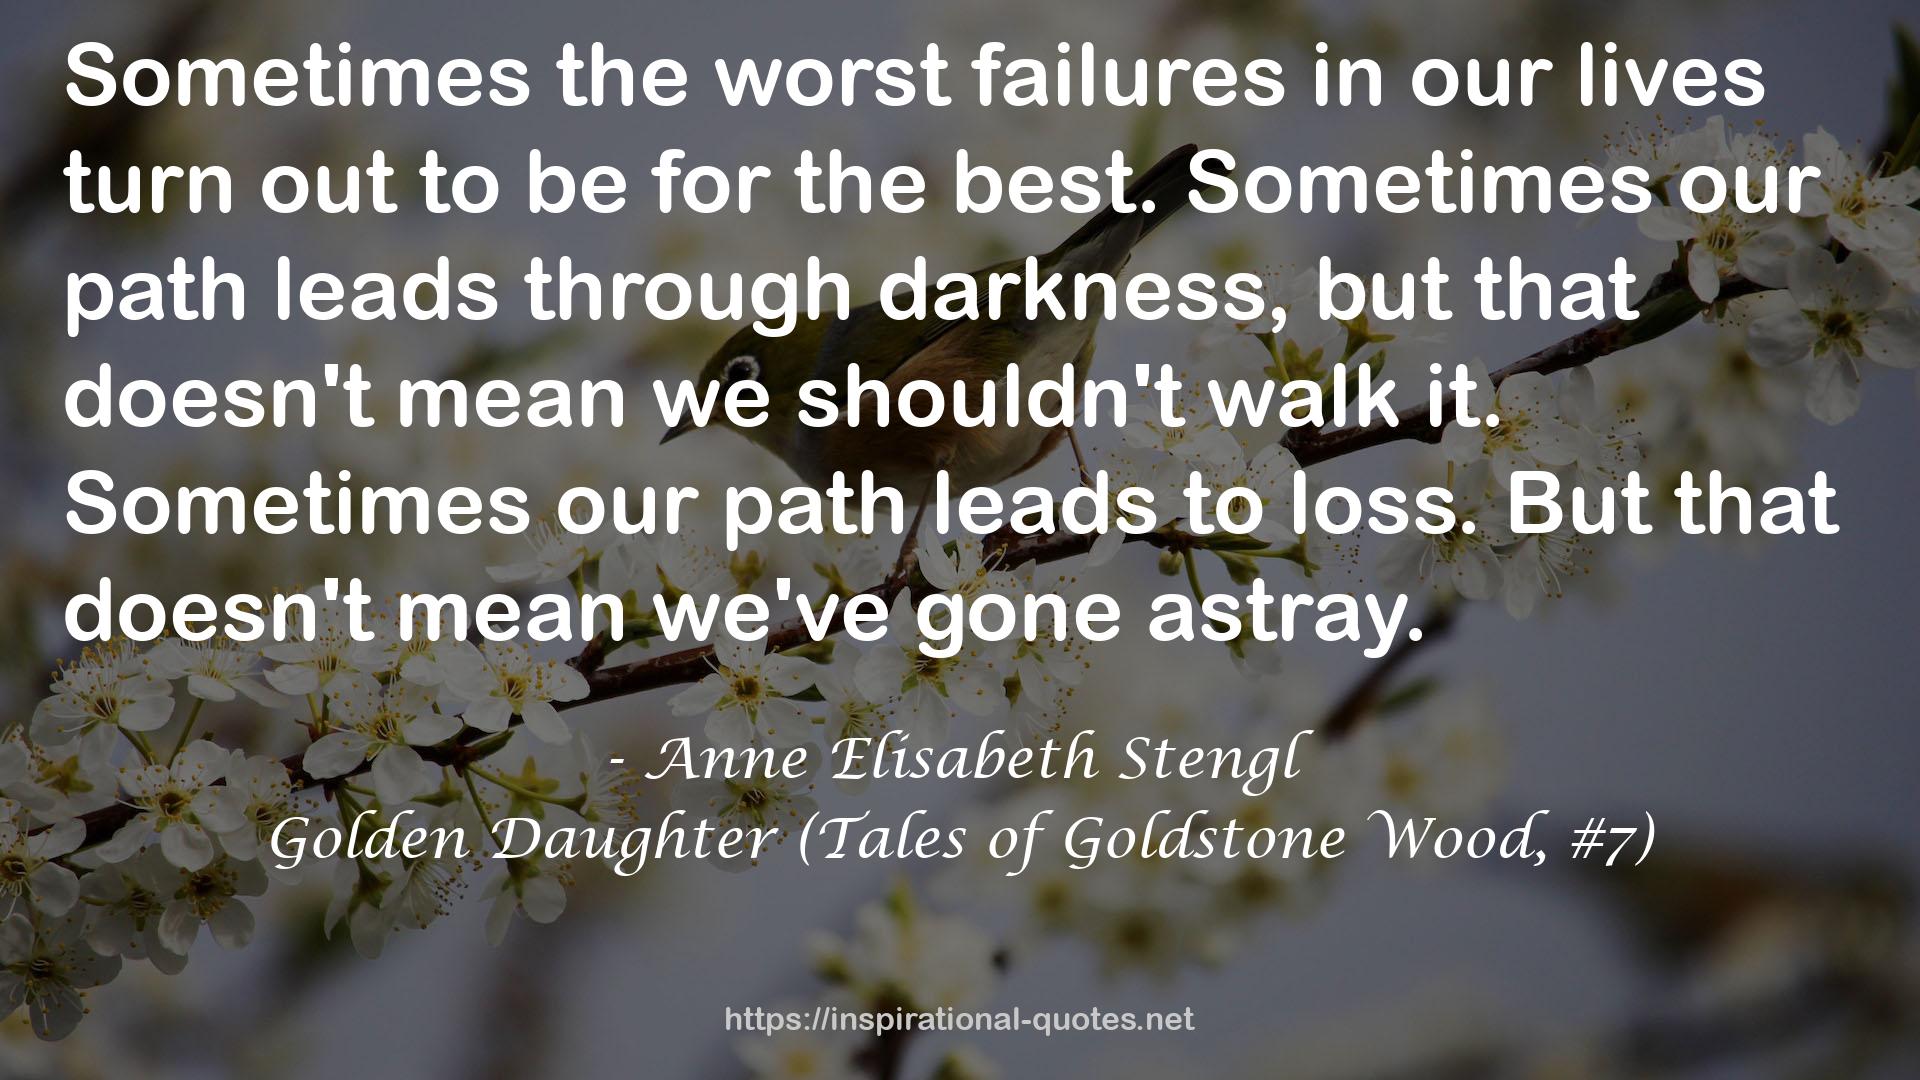 Golden Daughter (Tales of Goldstone Wood, #7) QUOTES